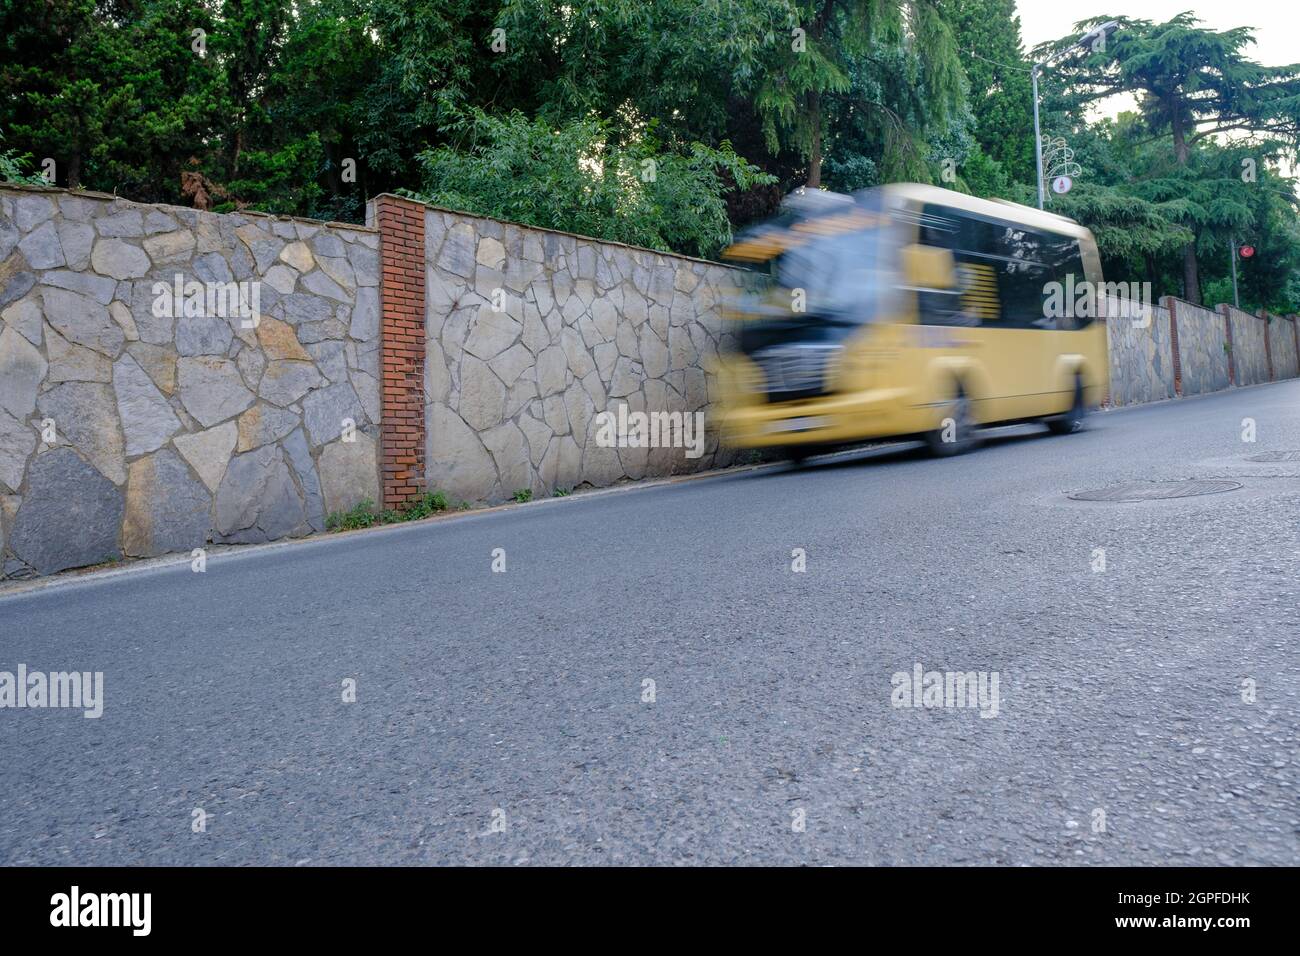 Beyoglu, Istanbul, Turkey - 06.27.2021: an out of focus yellow passenger minibus coming down from straight asphalt downhill road near some stone walls Stock Photo